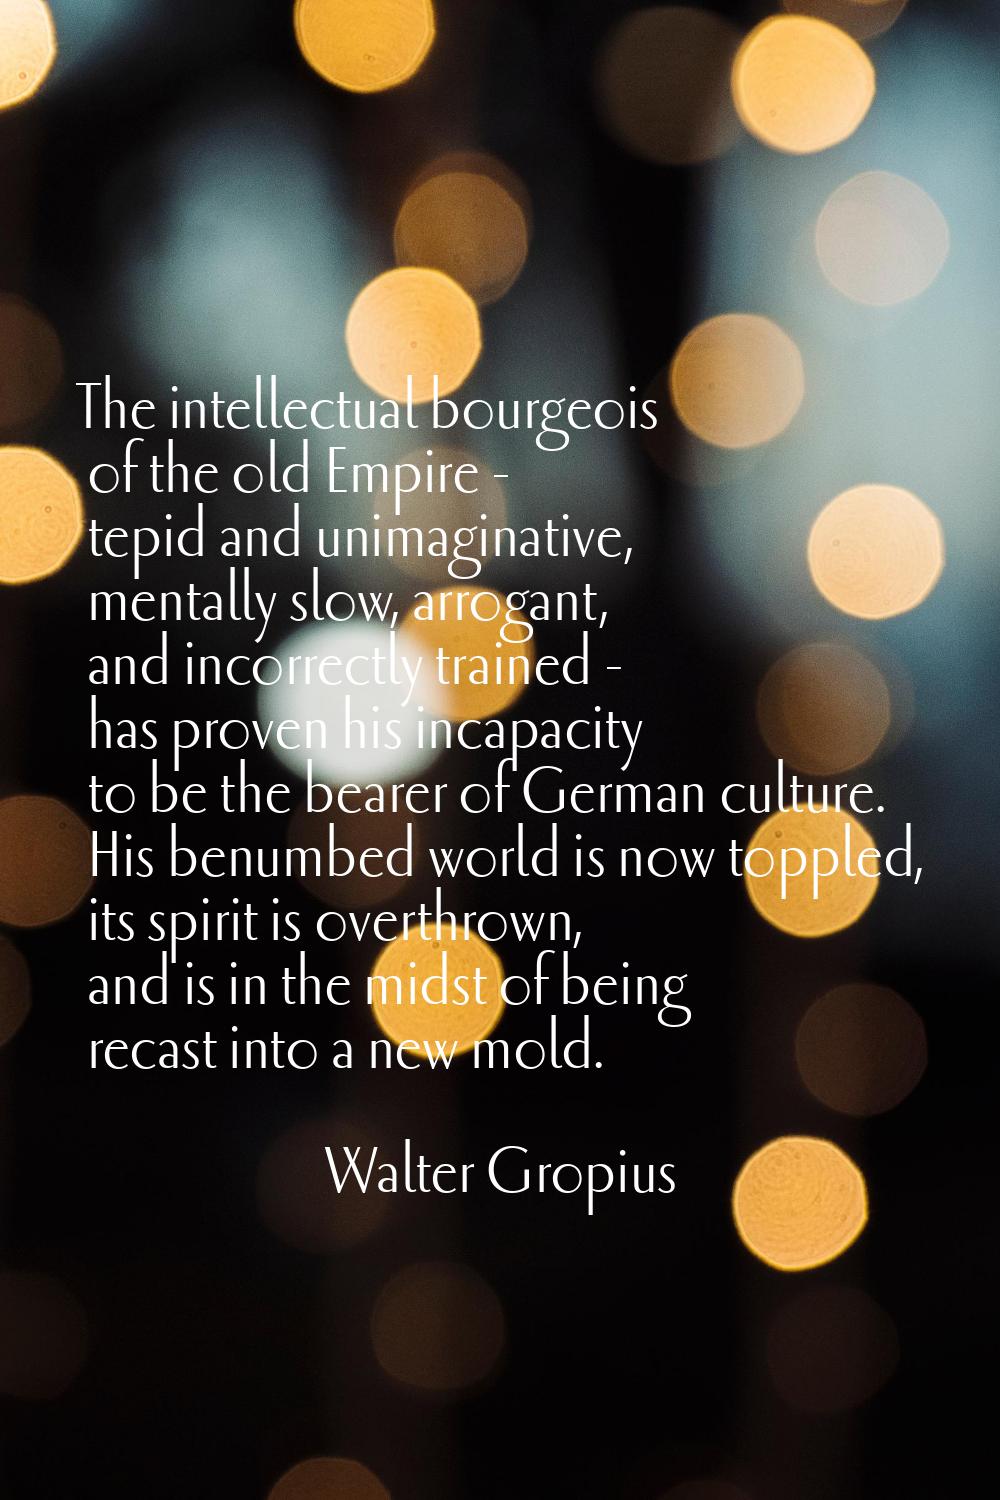 The intellectual bourgeois of the old Empire - tepid and unimaginative, mentally slow, arrogant, an